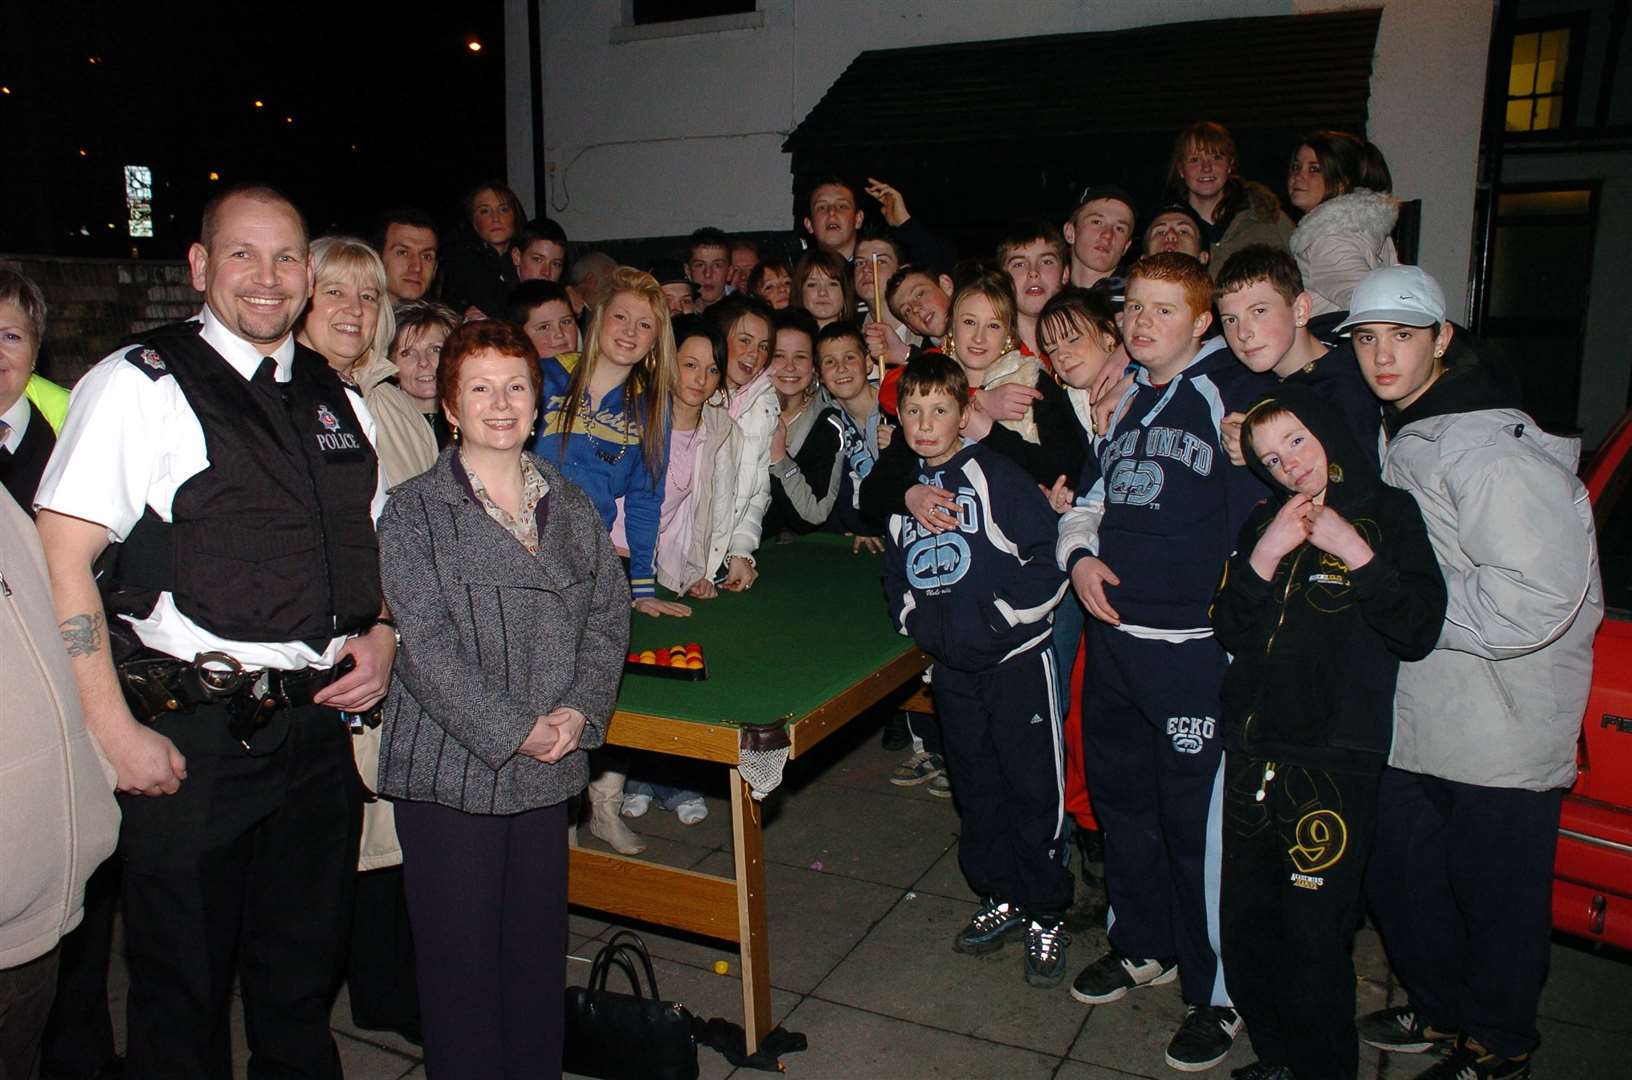 Police minister Hazel Blears visited The Wheatsheaf pub's youth club in March 2005. Today the Chatham pub it is sadly permanently closed